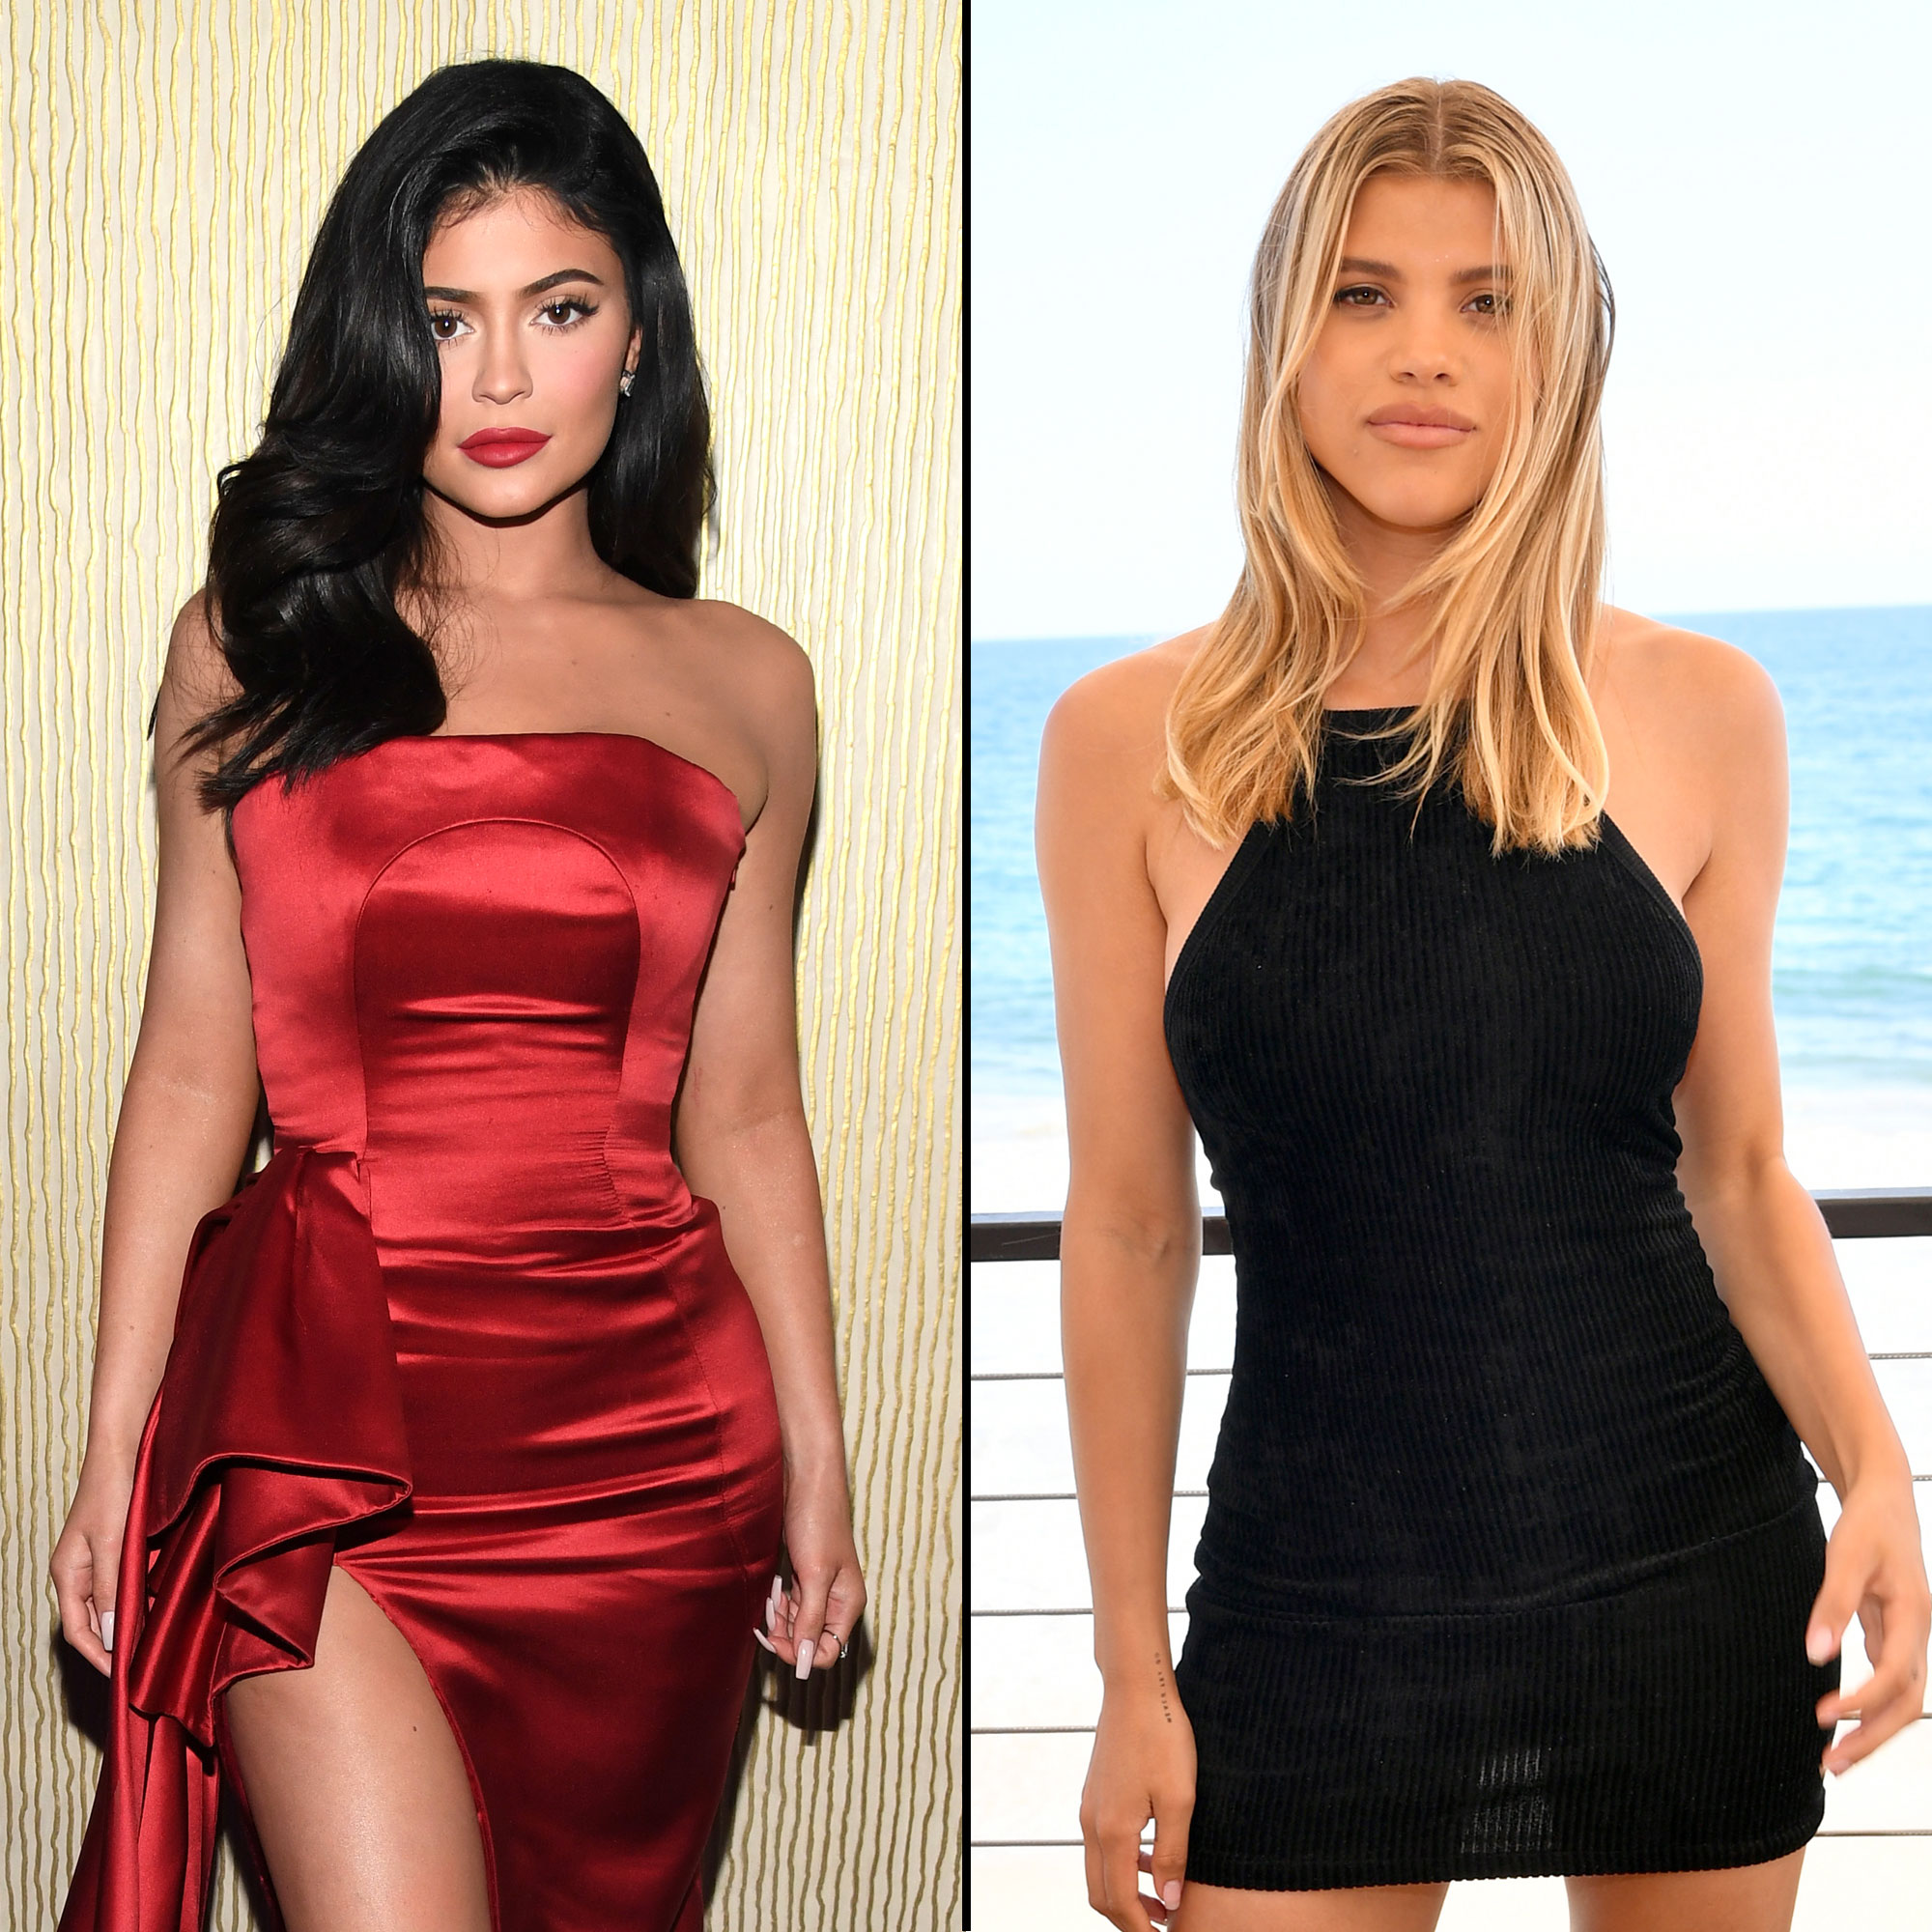 Beach Mother Naked - Kylie Jenner, Sofia Richie Pose Nude During Girls' Trip